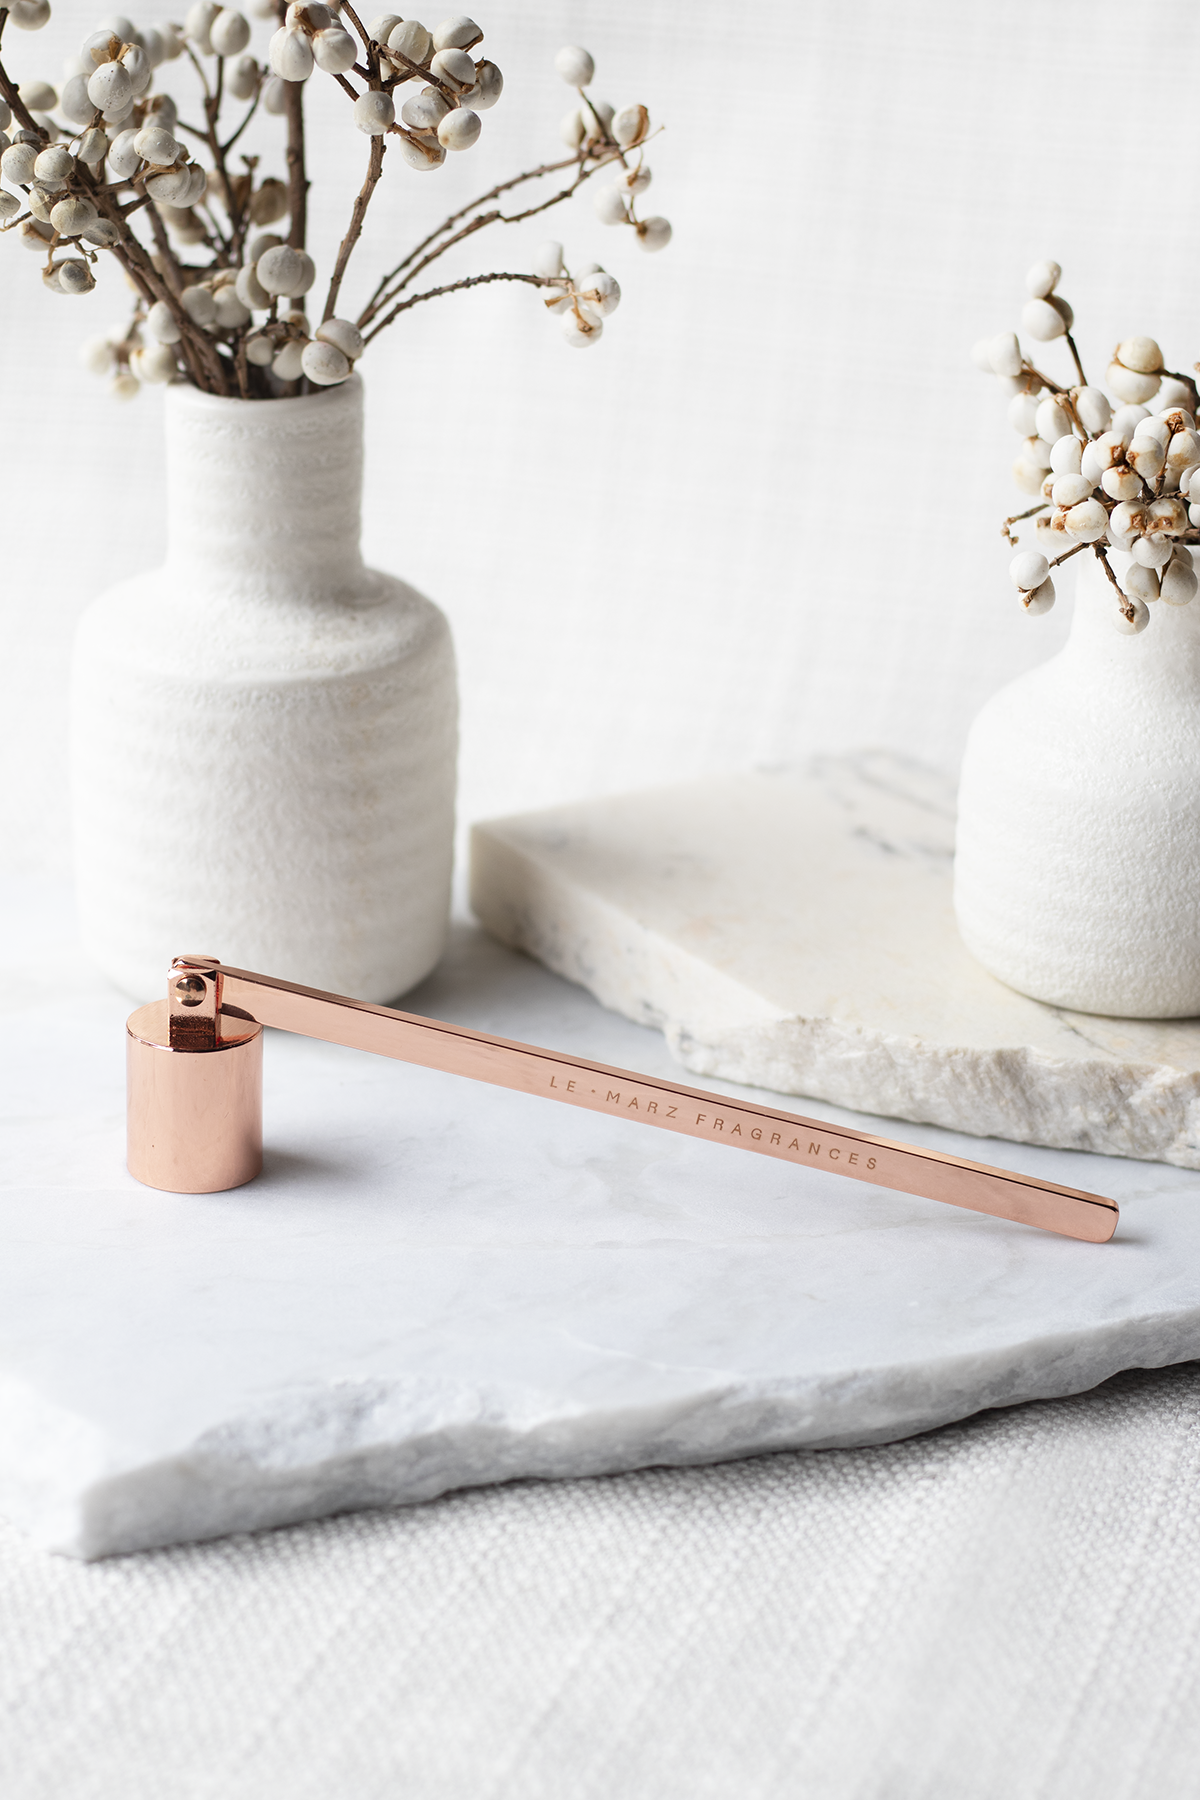 Champagne Rose Gold coloured candle snuffer for candle care.